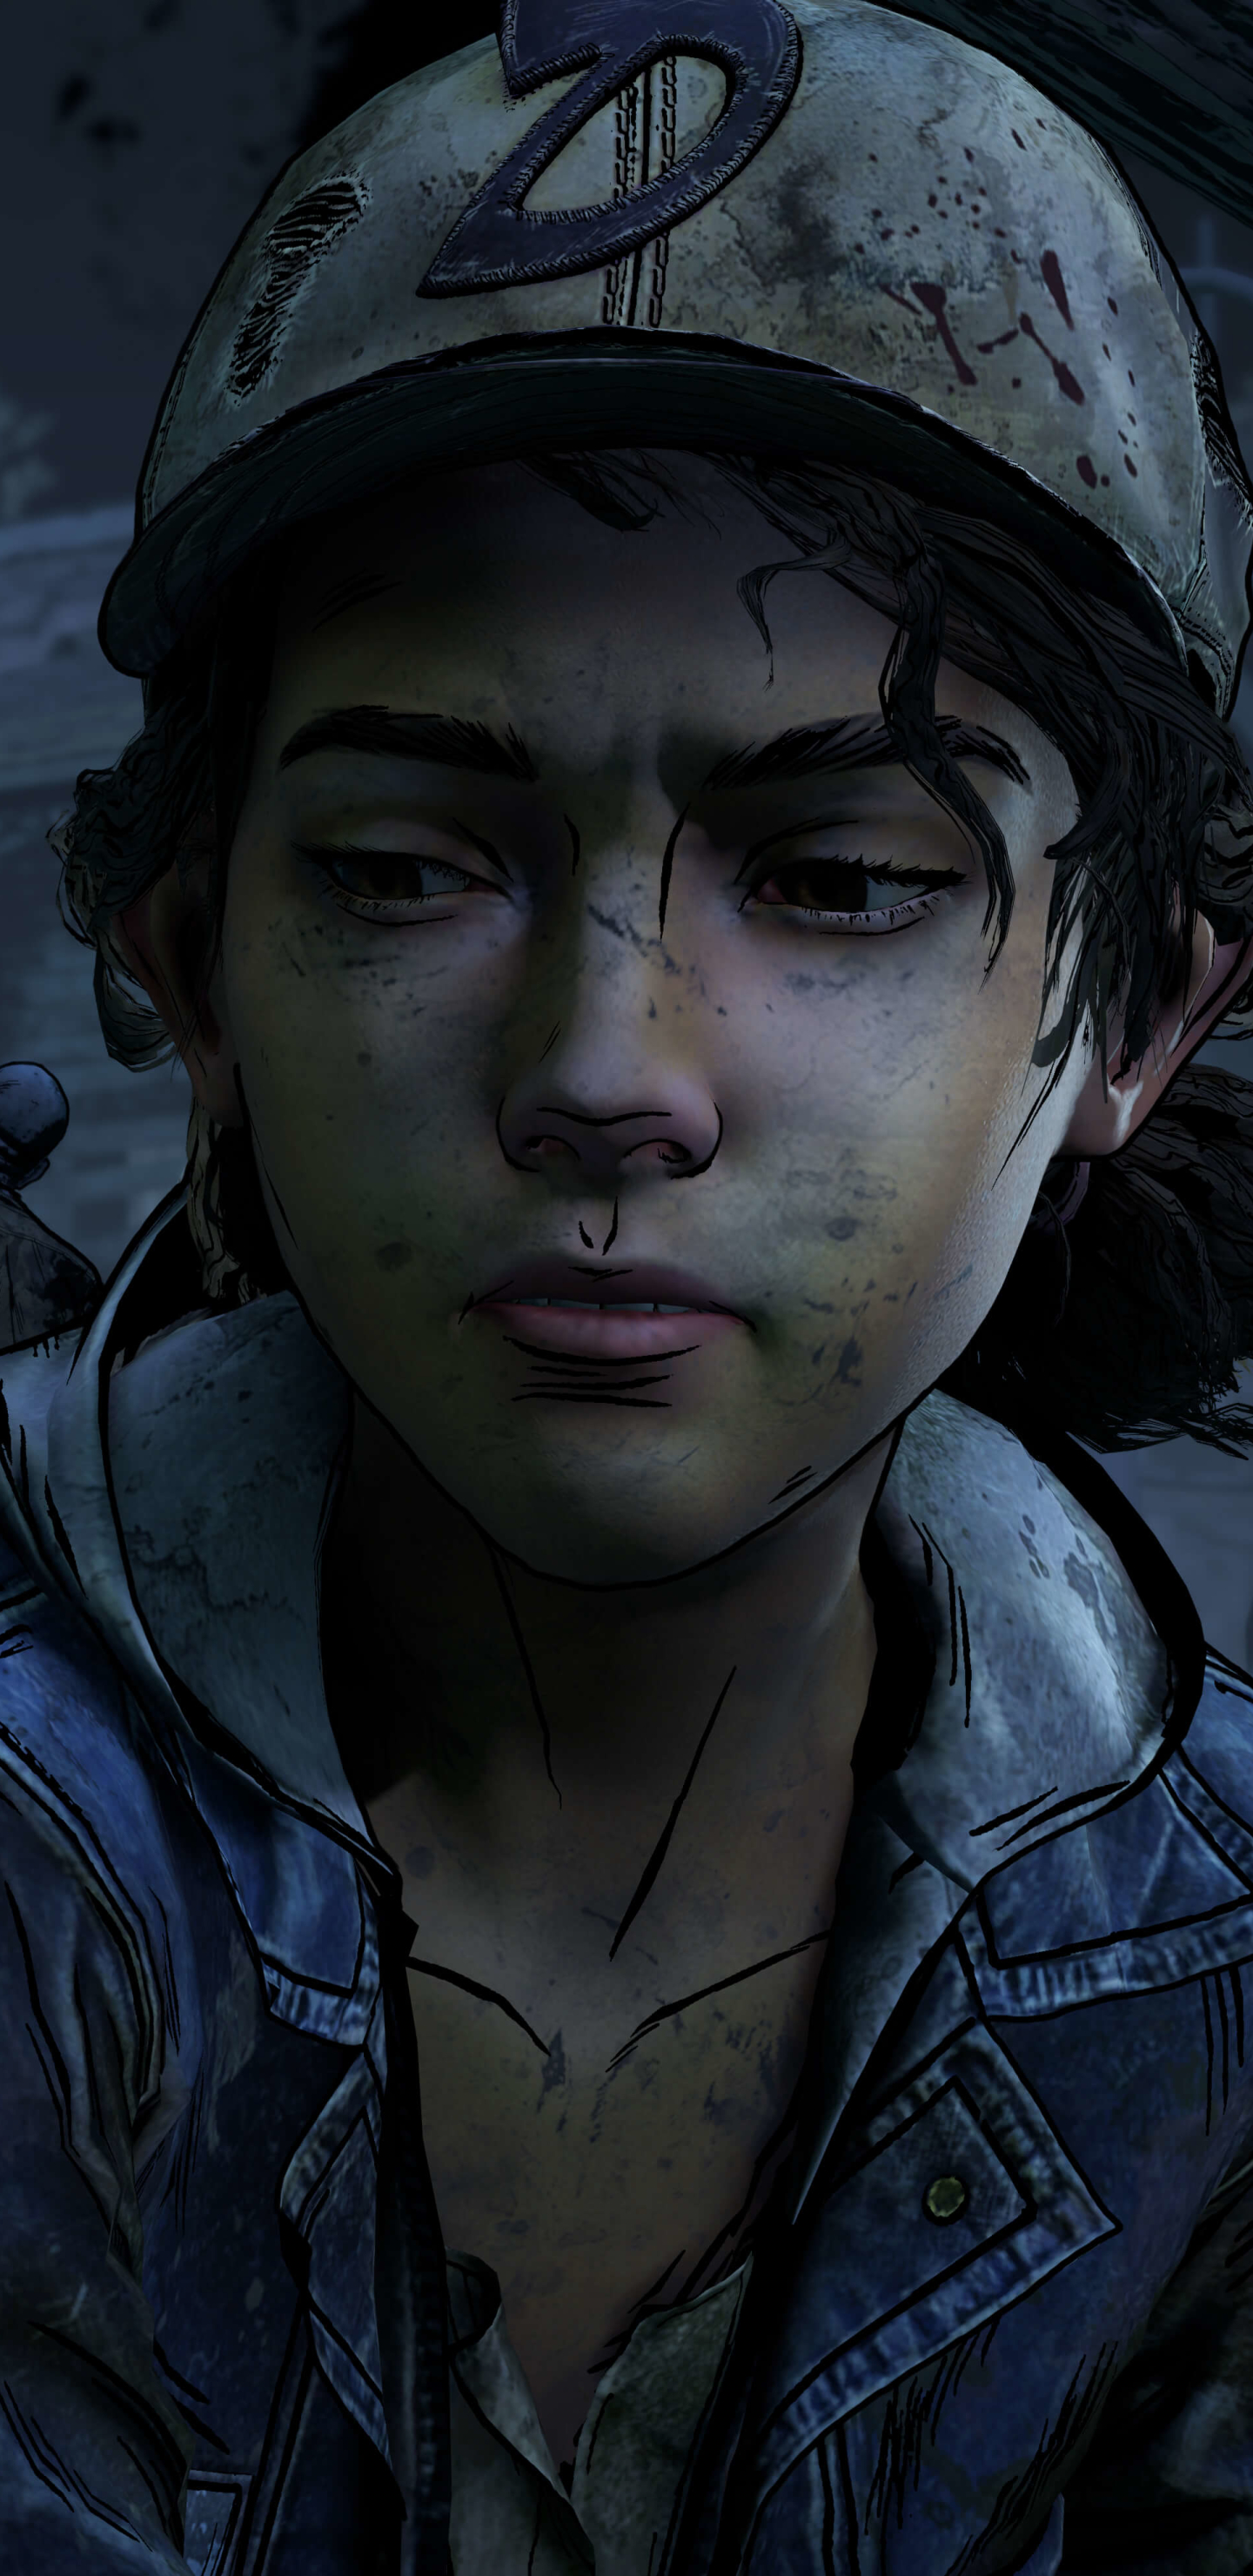  Clementine (The Walking Dead) Cellphone FHD pic